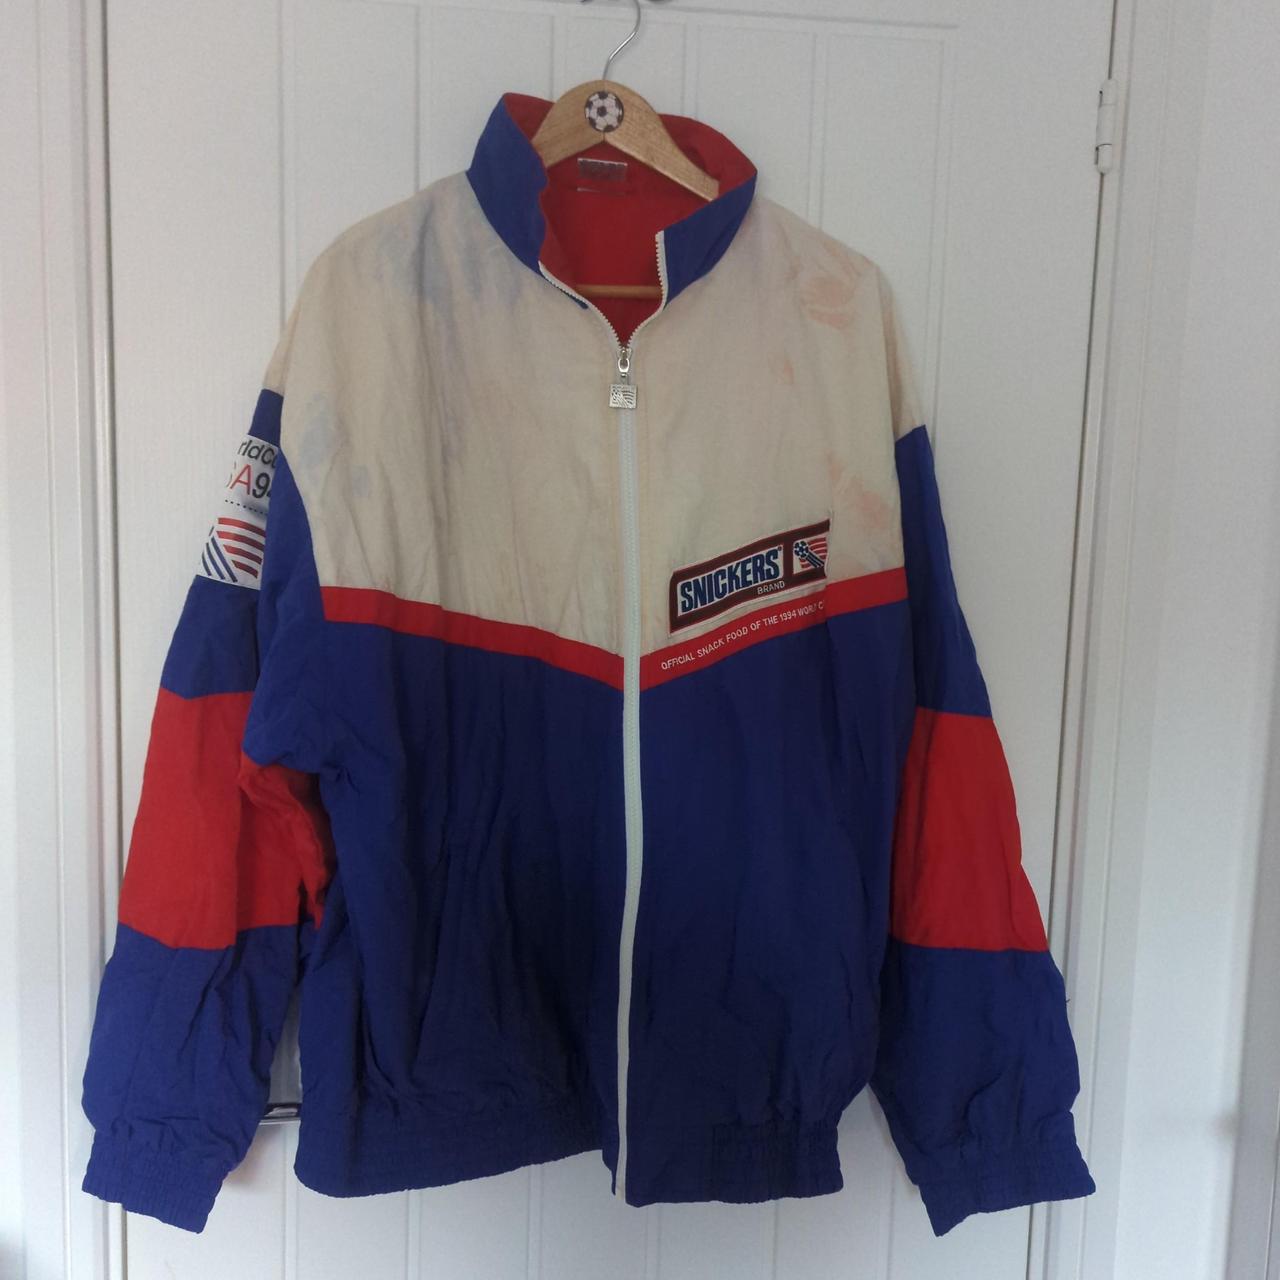 World cup 1994 snickers jacket XL World cup... - Depop